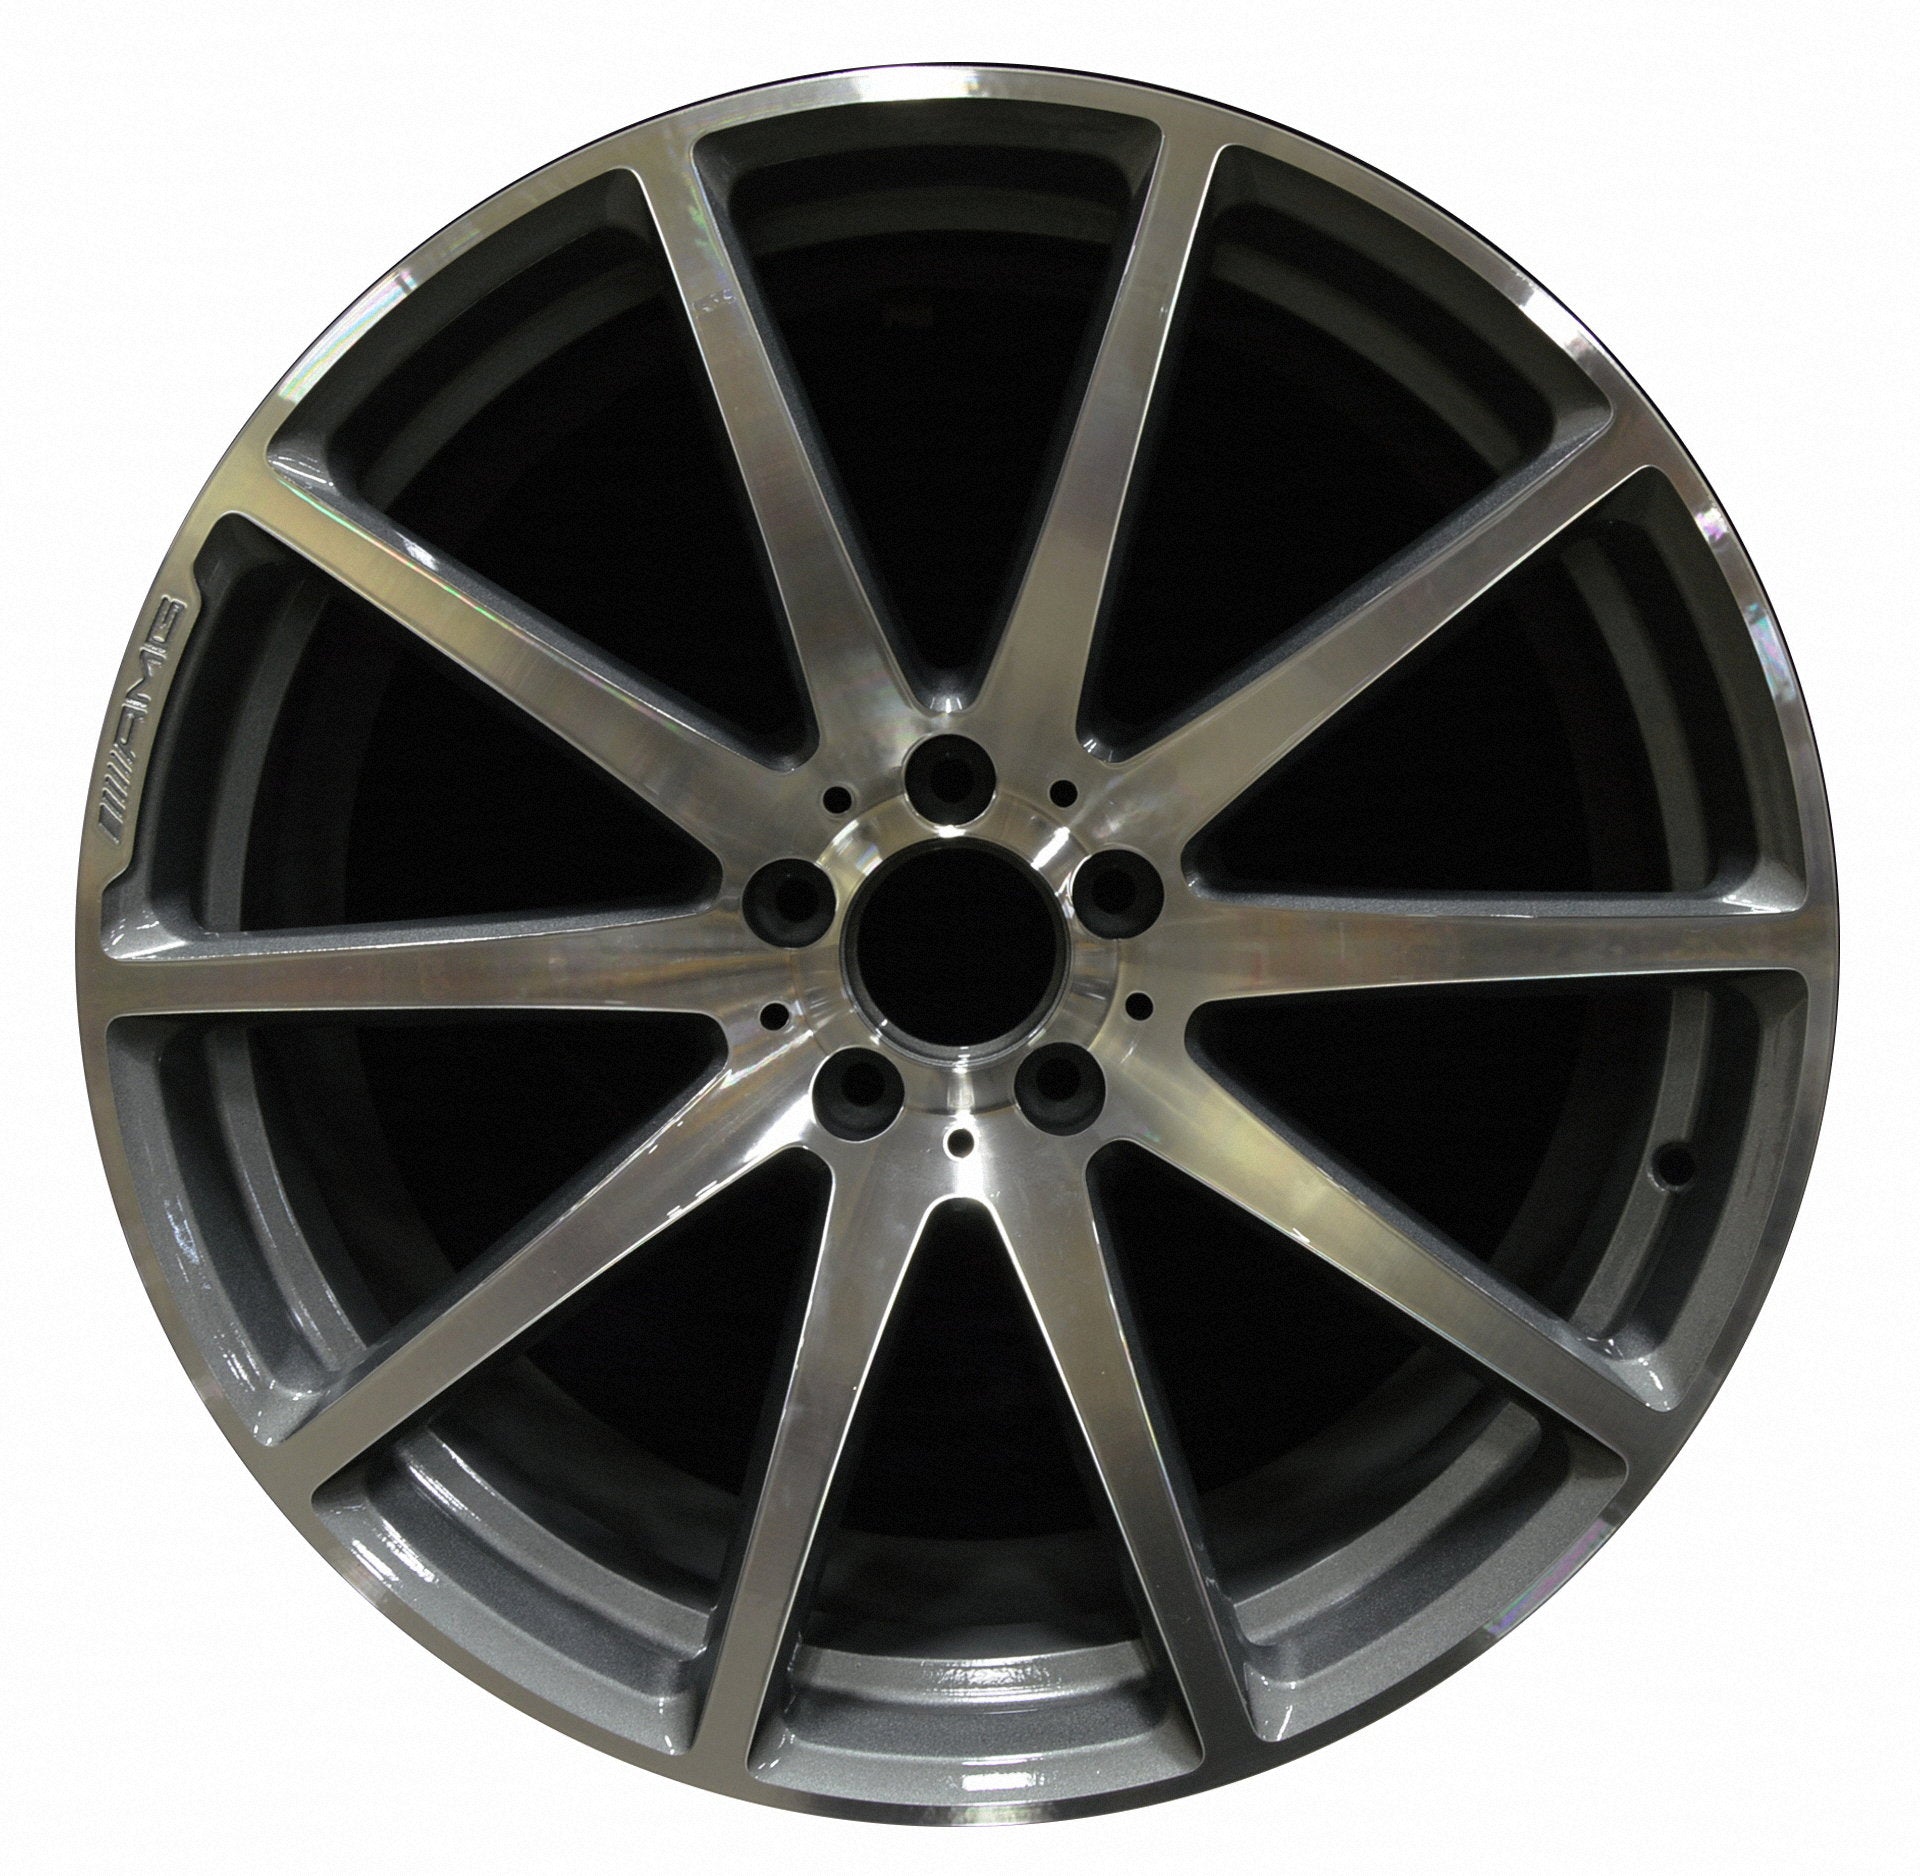 Mercedes SL65  2013, 2014, 2015, 2016, 2017, 2018 Factory OEM Car Wheel Size 19x9 Alloy WAO.85380FT.LC98.MABRT